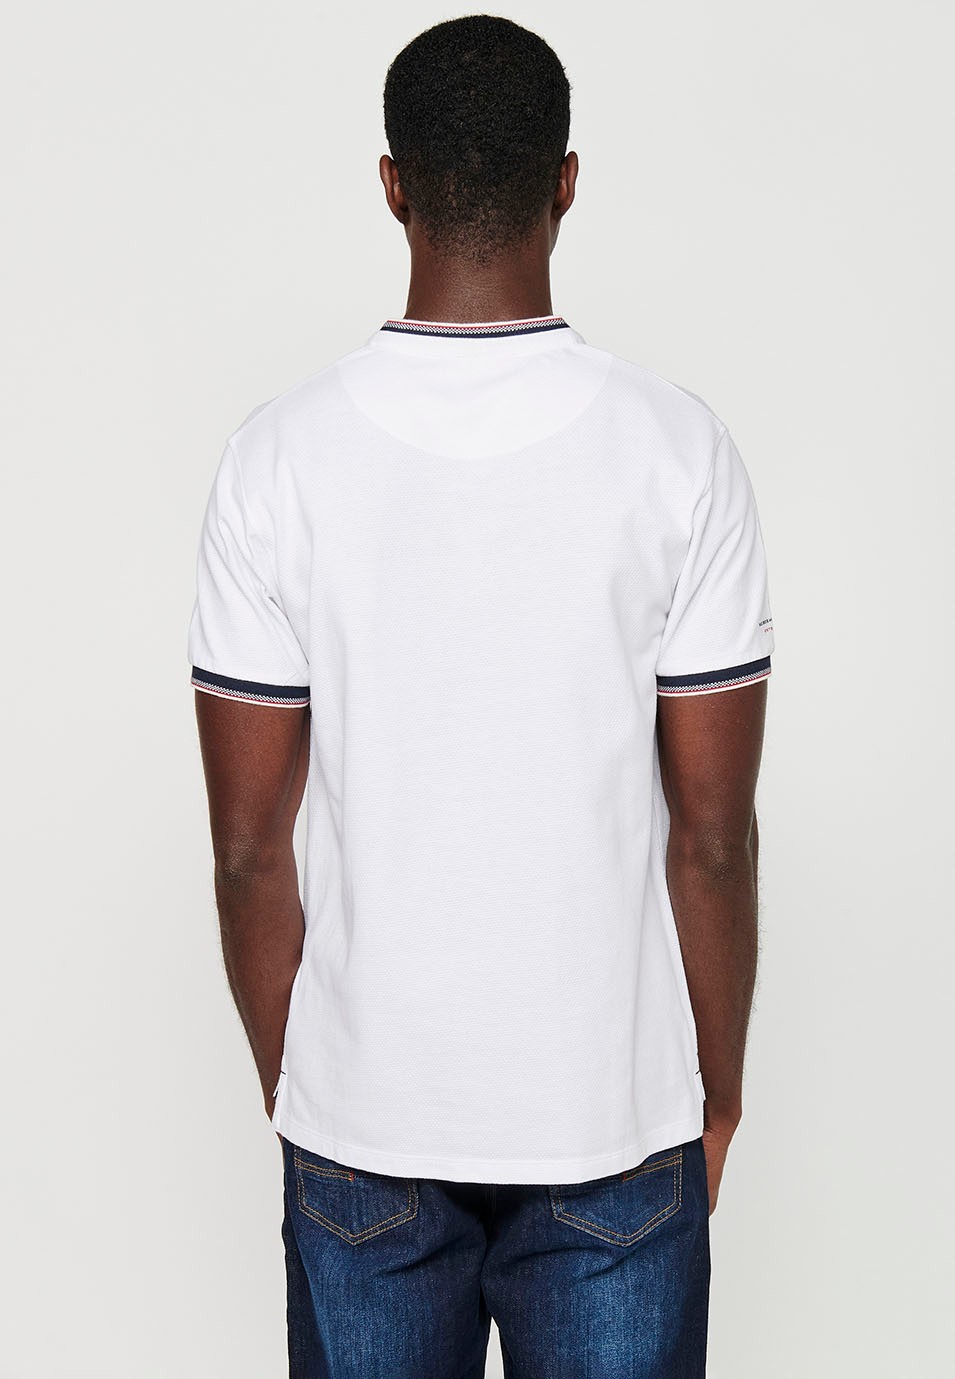 Short-sleeved cotton polo shirt finished in rib with a round neck with buttoned opening and textured with side slits in White for Men 8